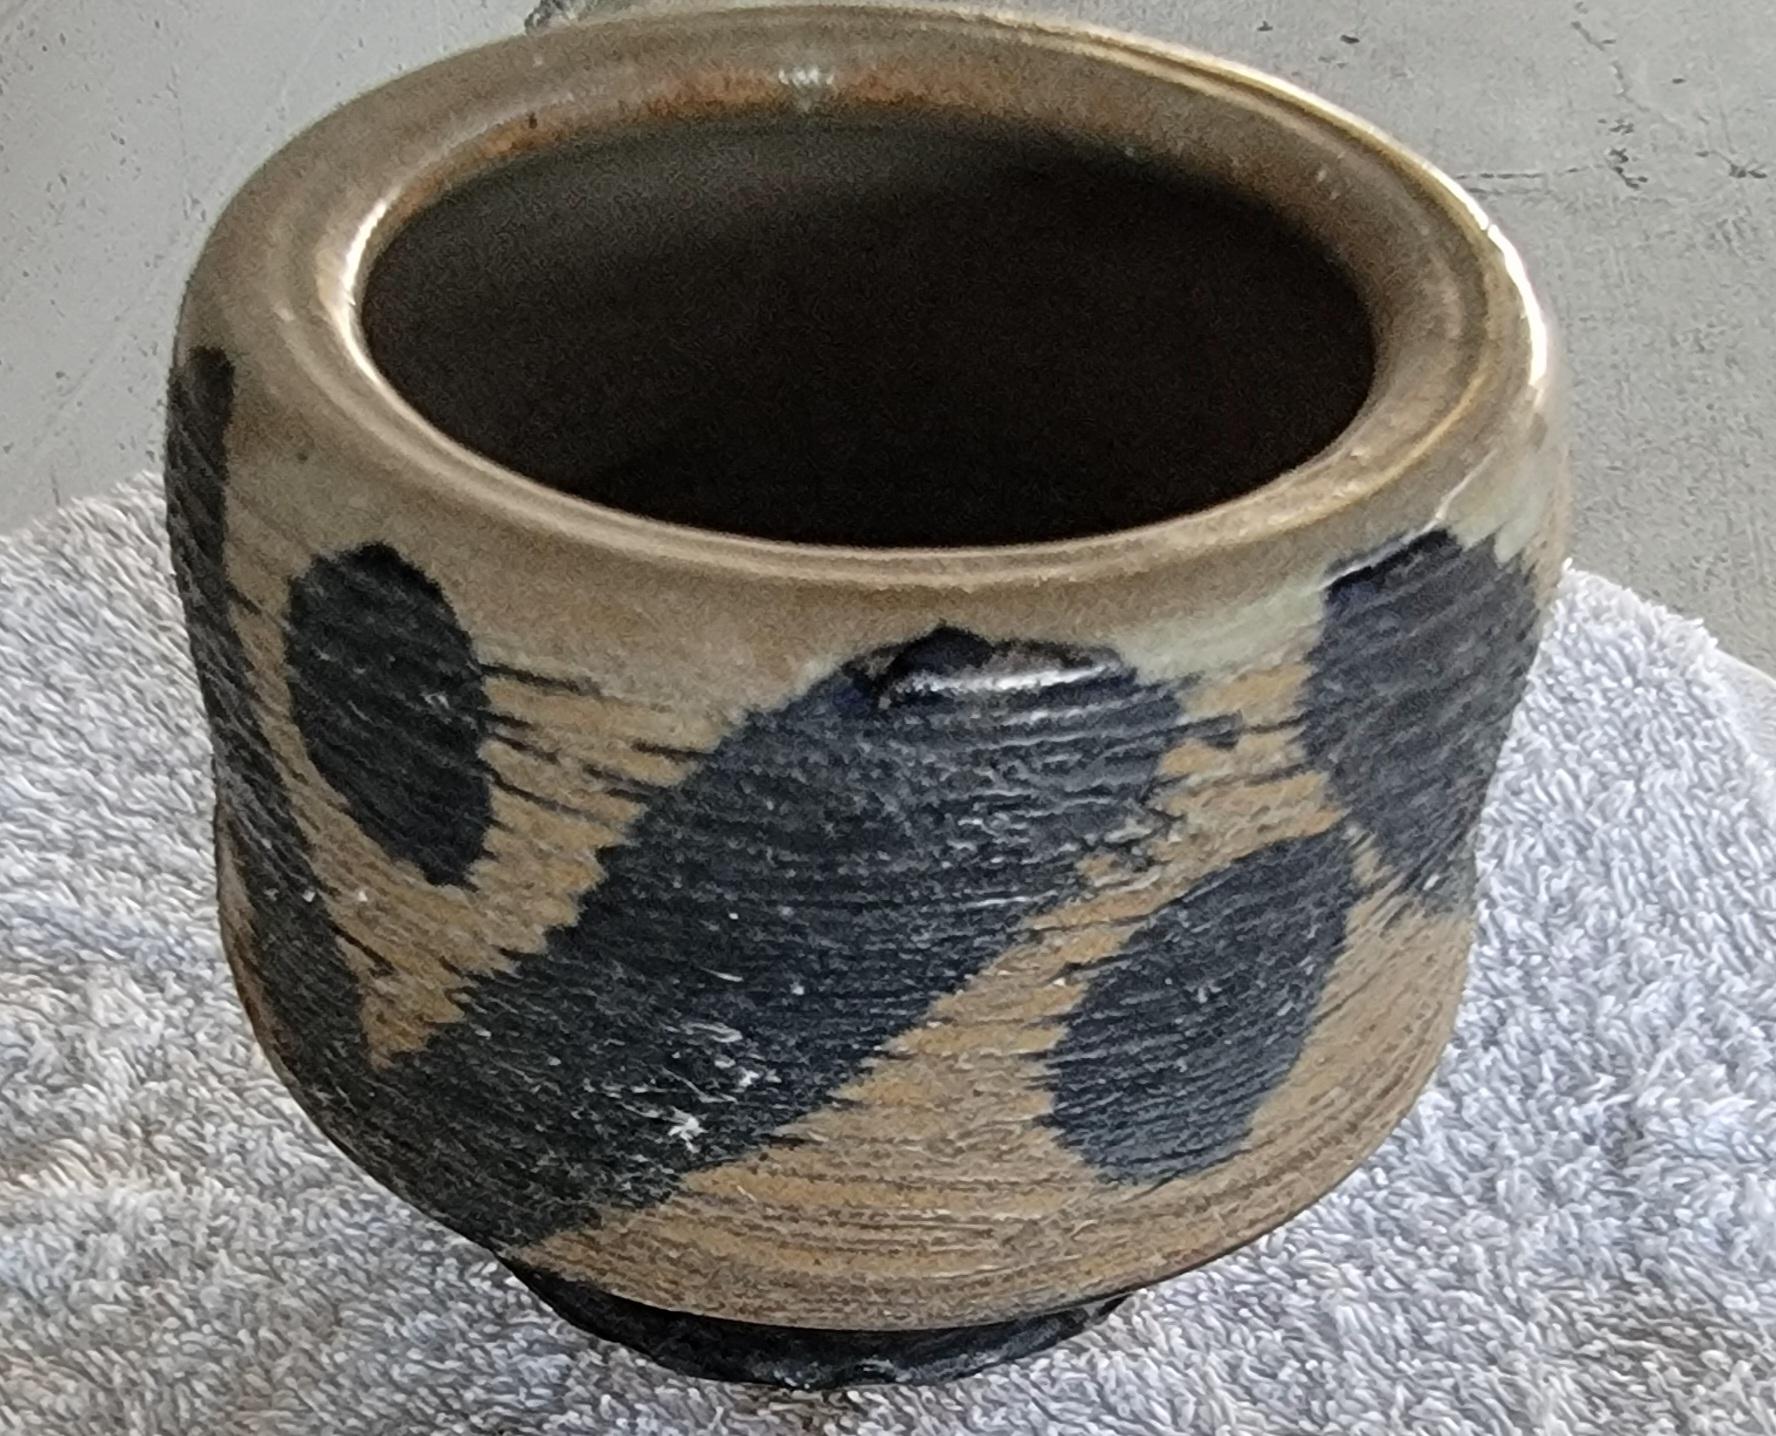 Mid 20th century hand-thrown pot by Paul Volckening. Abstract Expressionist Potter. California, 1970's. 

PAUL VOLCKENING:
1928Born Minneola, New York
2016Died Santa Fe, New Mexico

EDUCATION
1951First pottery class, The College of Arts and Crafts,